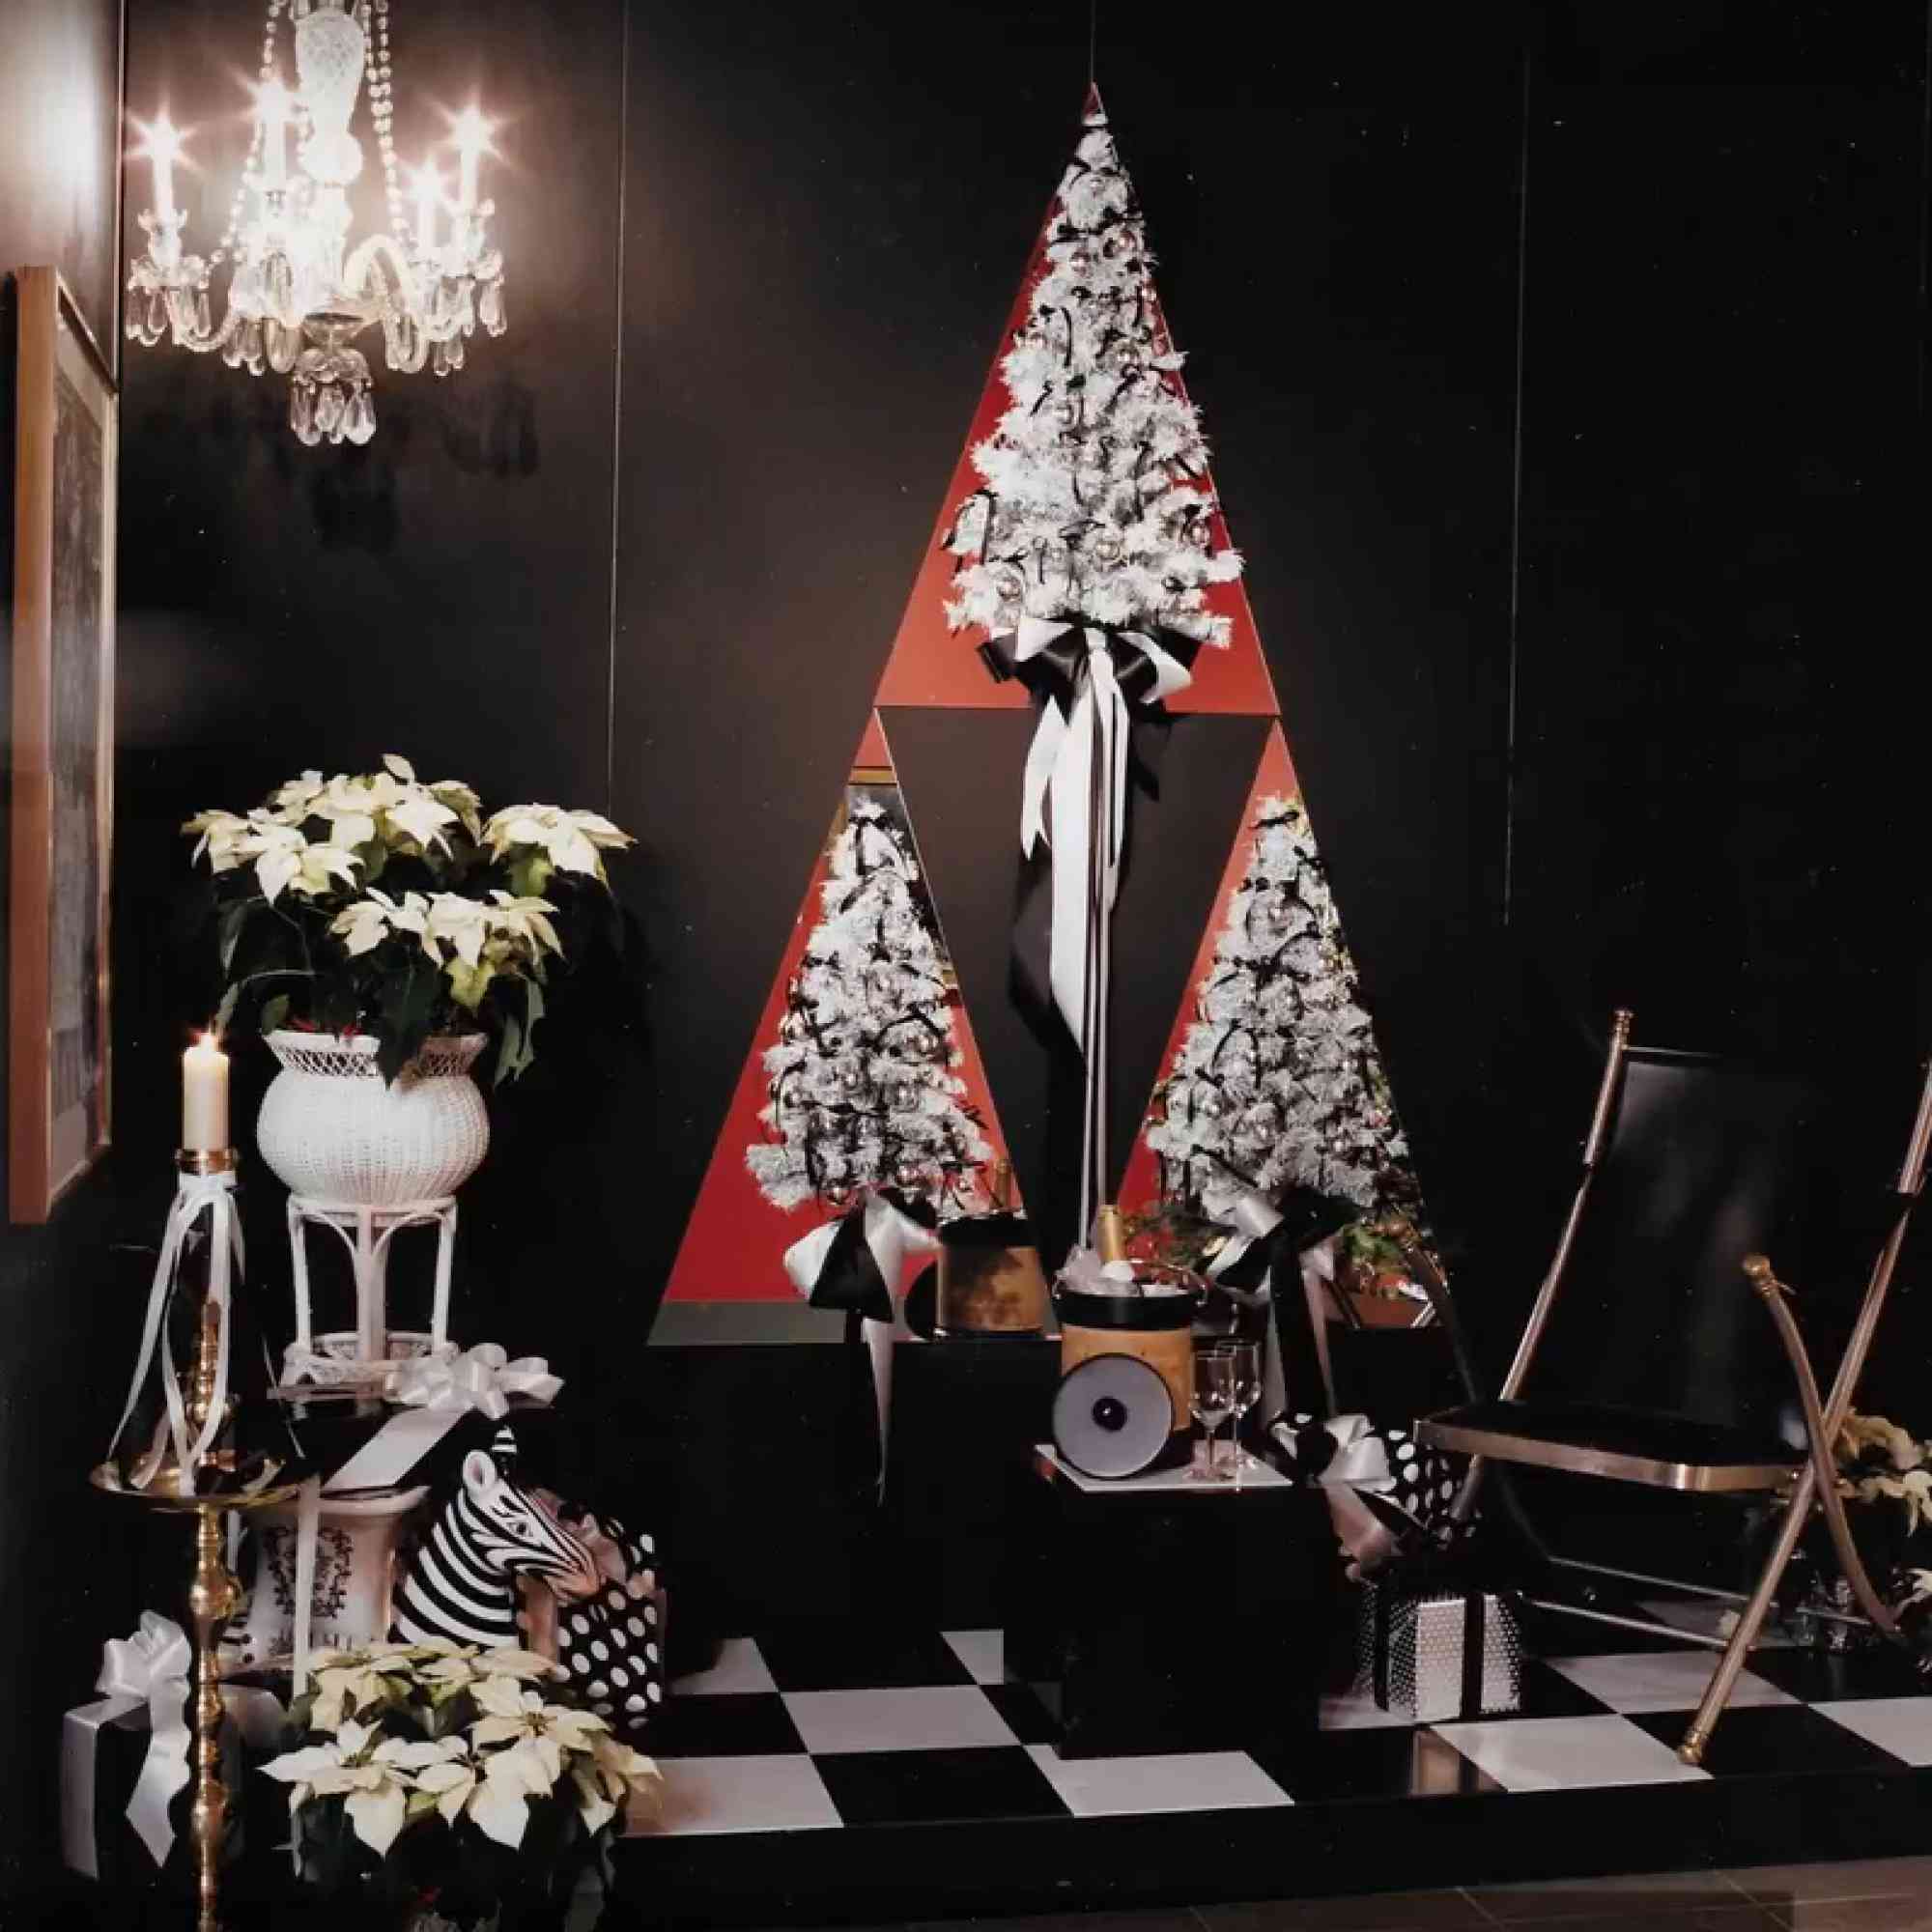 Display designed by Vaughn Shirk and Shirley Palermo from 1984 Festival of Trees, on view December 1–December 16, 1984.